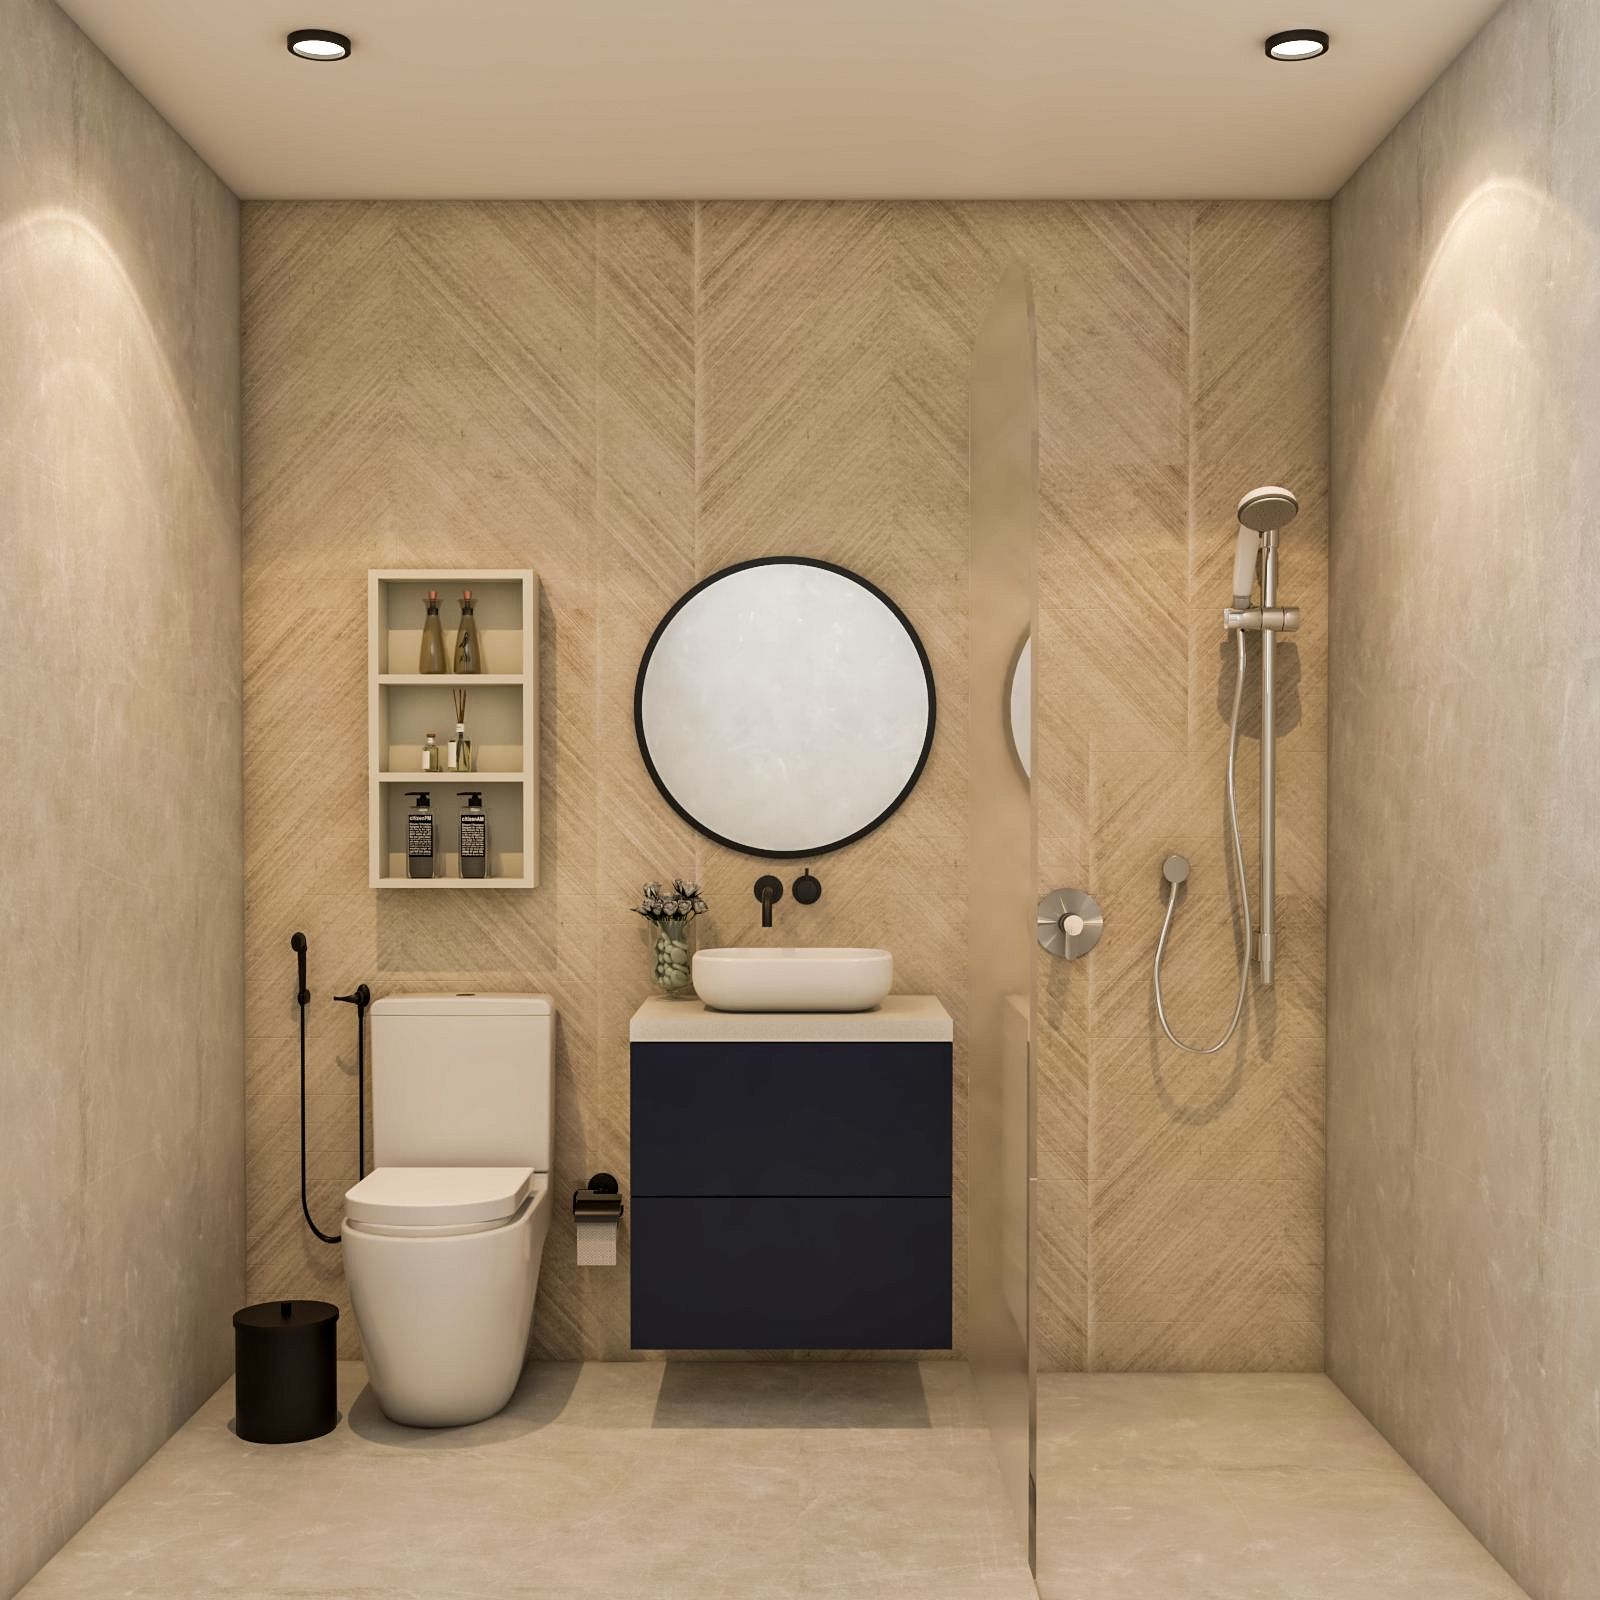 Contemporary Light Brown and Beige Bathroom Design with Dark Brown Wall-Mounted Black Vanity Unit